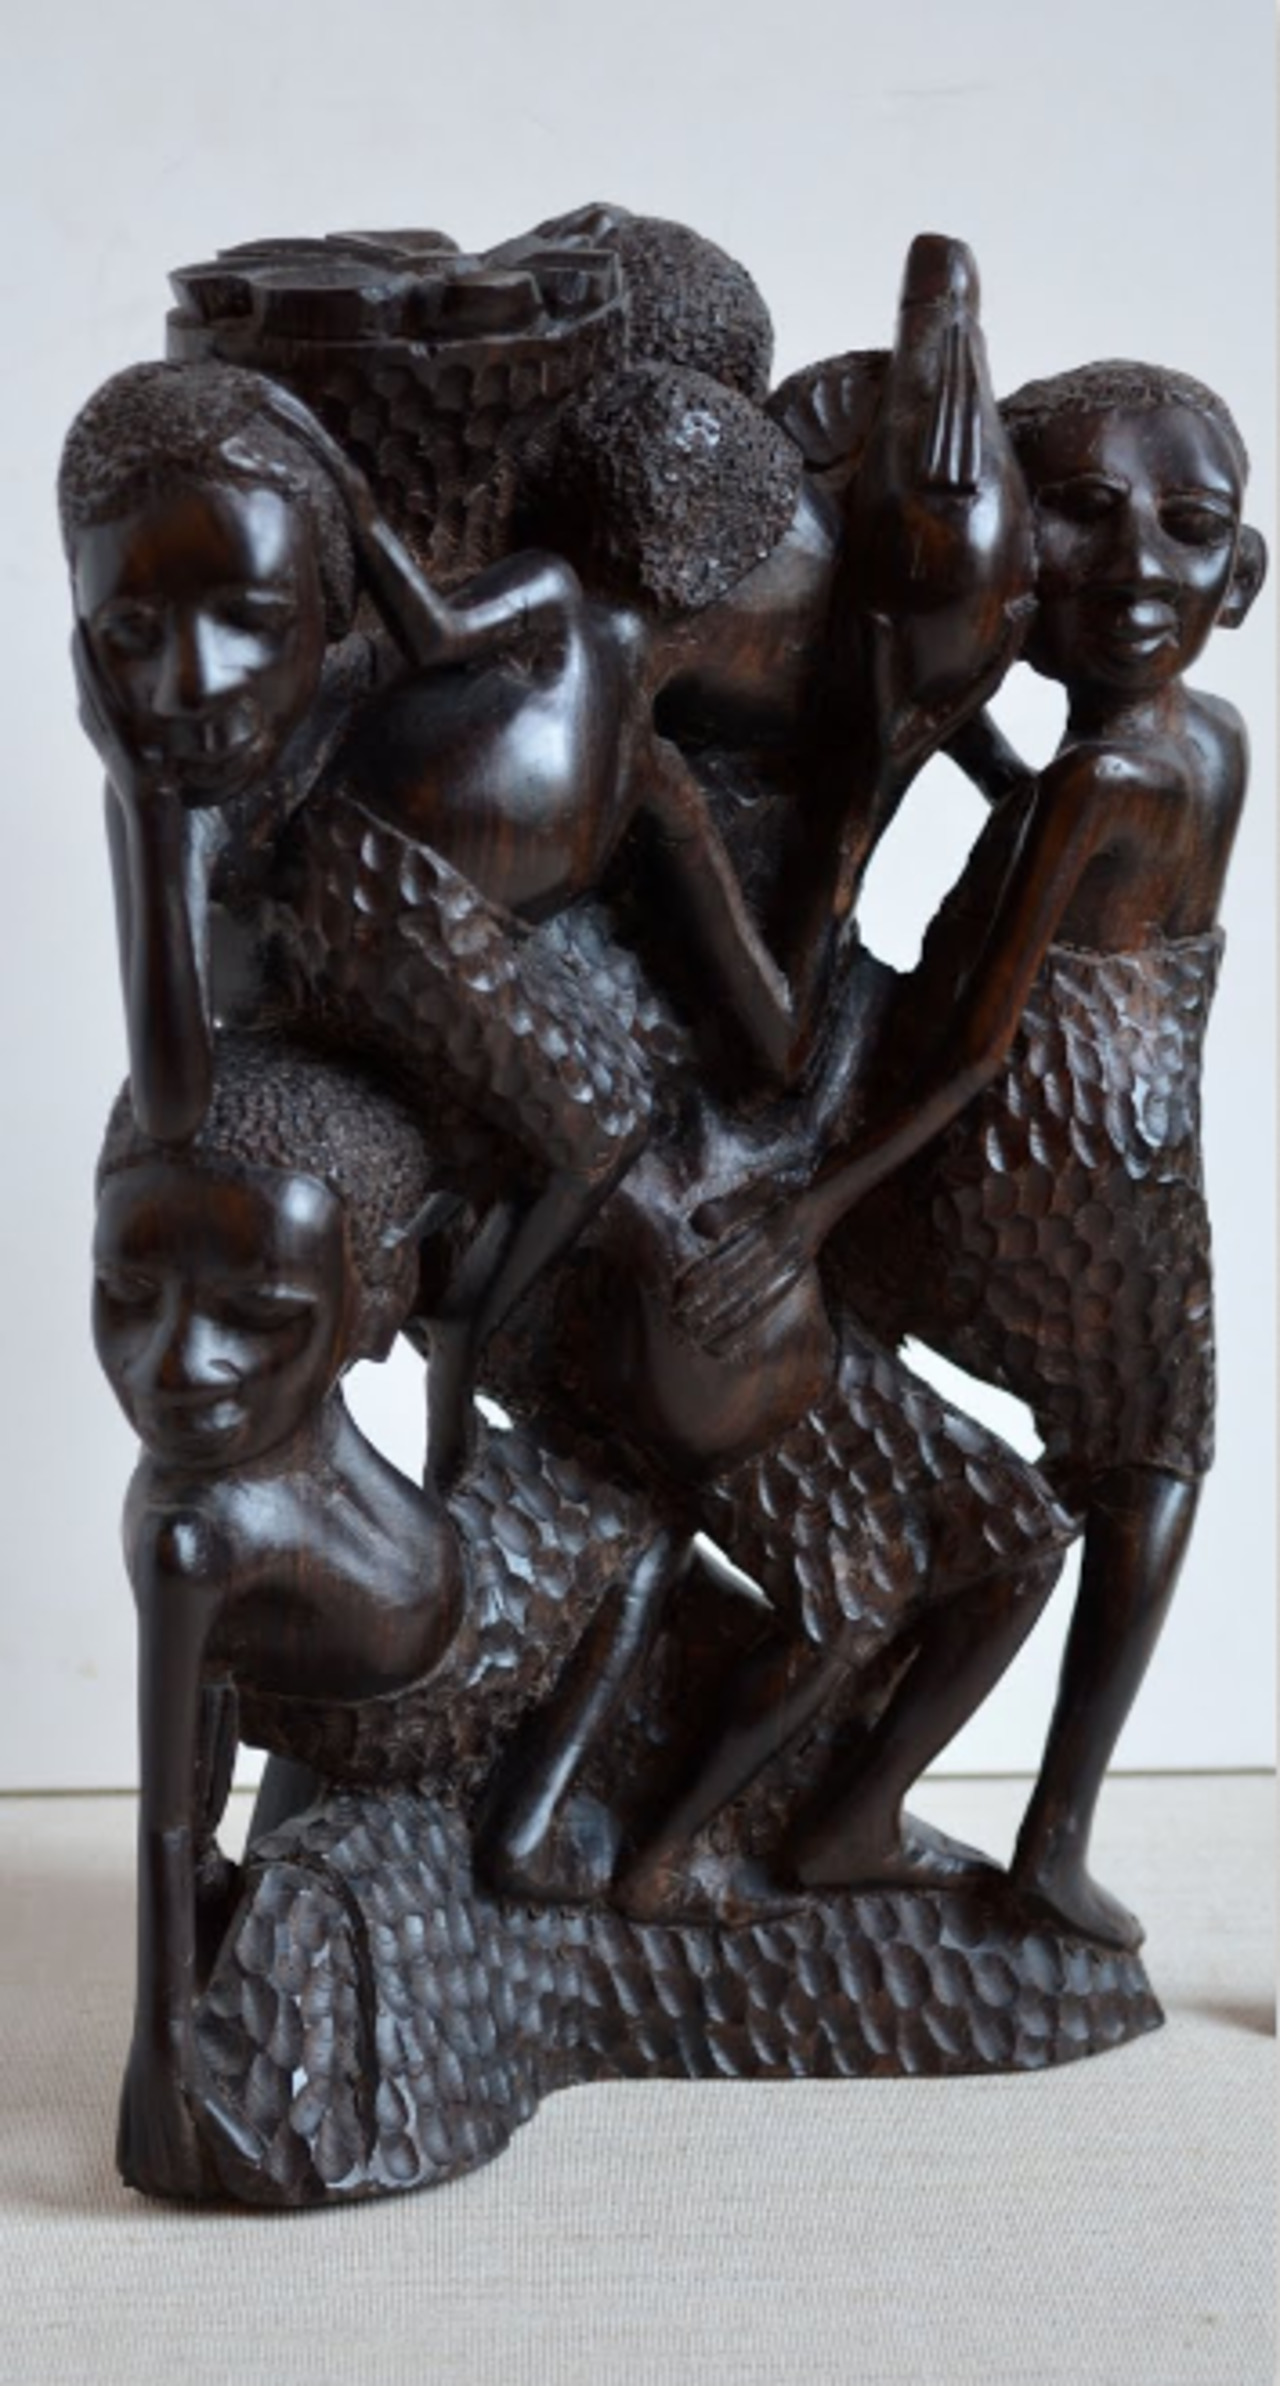 "Mother With Children." 1993.
Ebony. ASTRA Museum. #art #scupture #motherhood http://t.co/4AgbwU80gJ